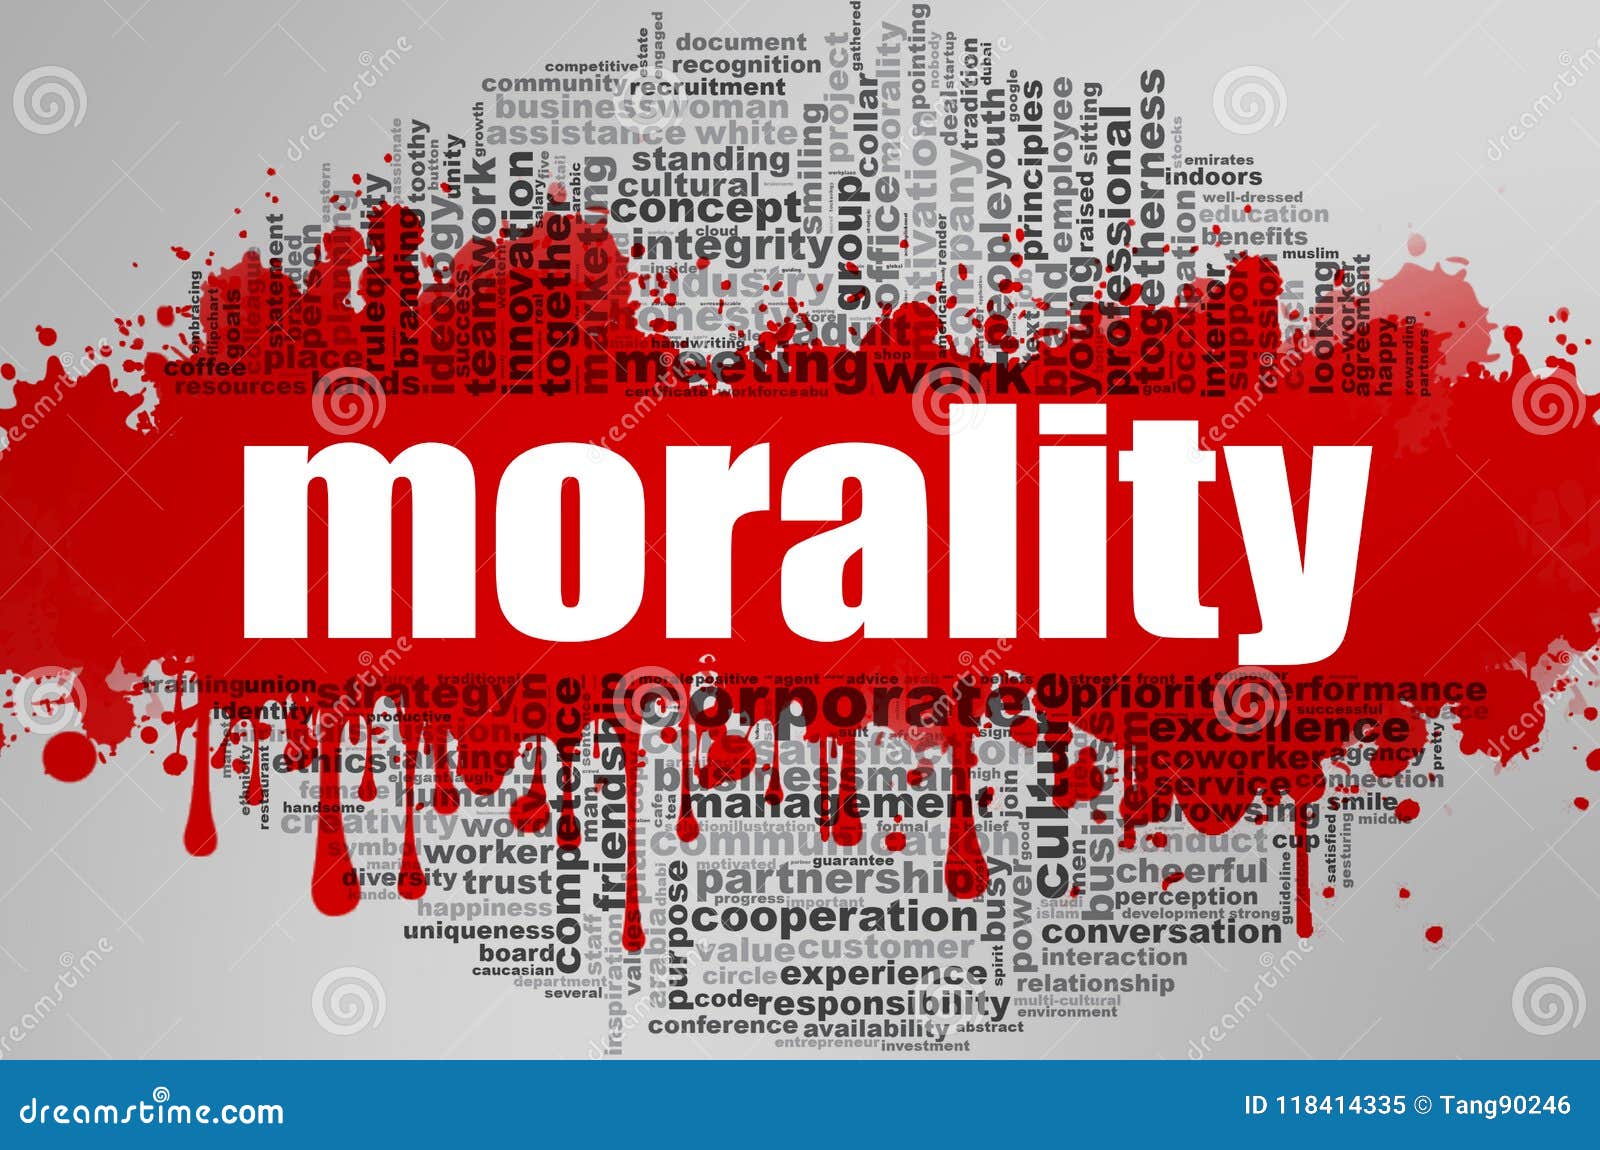 morality clipart people